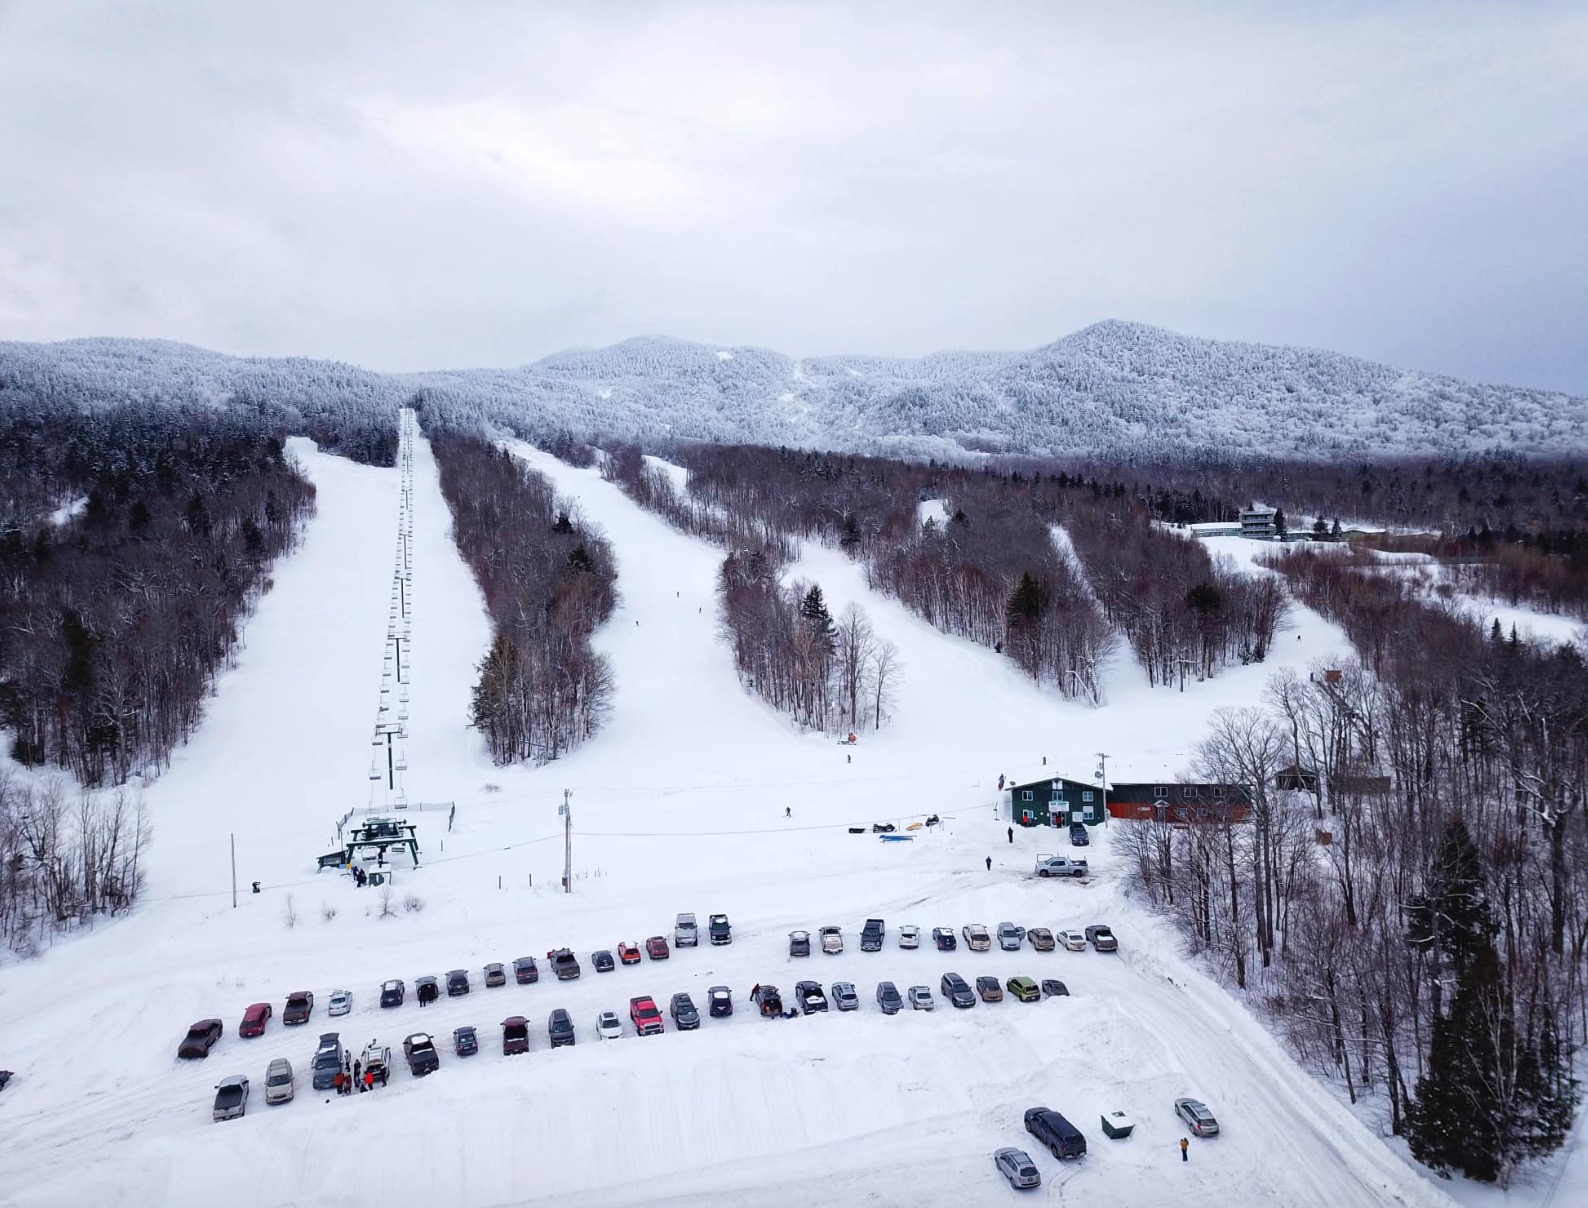 Maine Ski Resort Expansion Project Gets Approval From The State